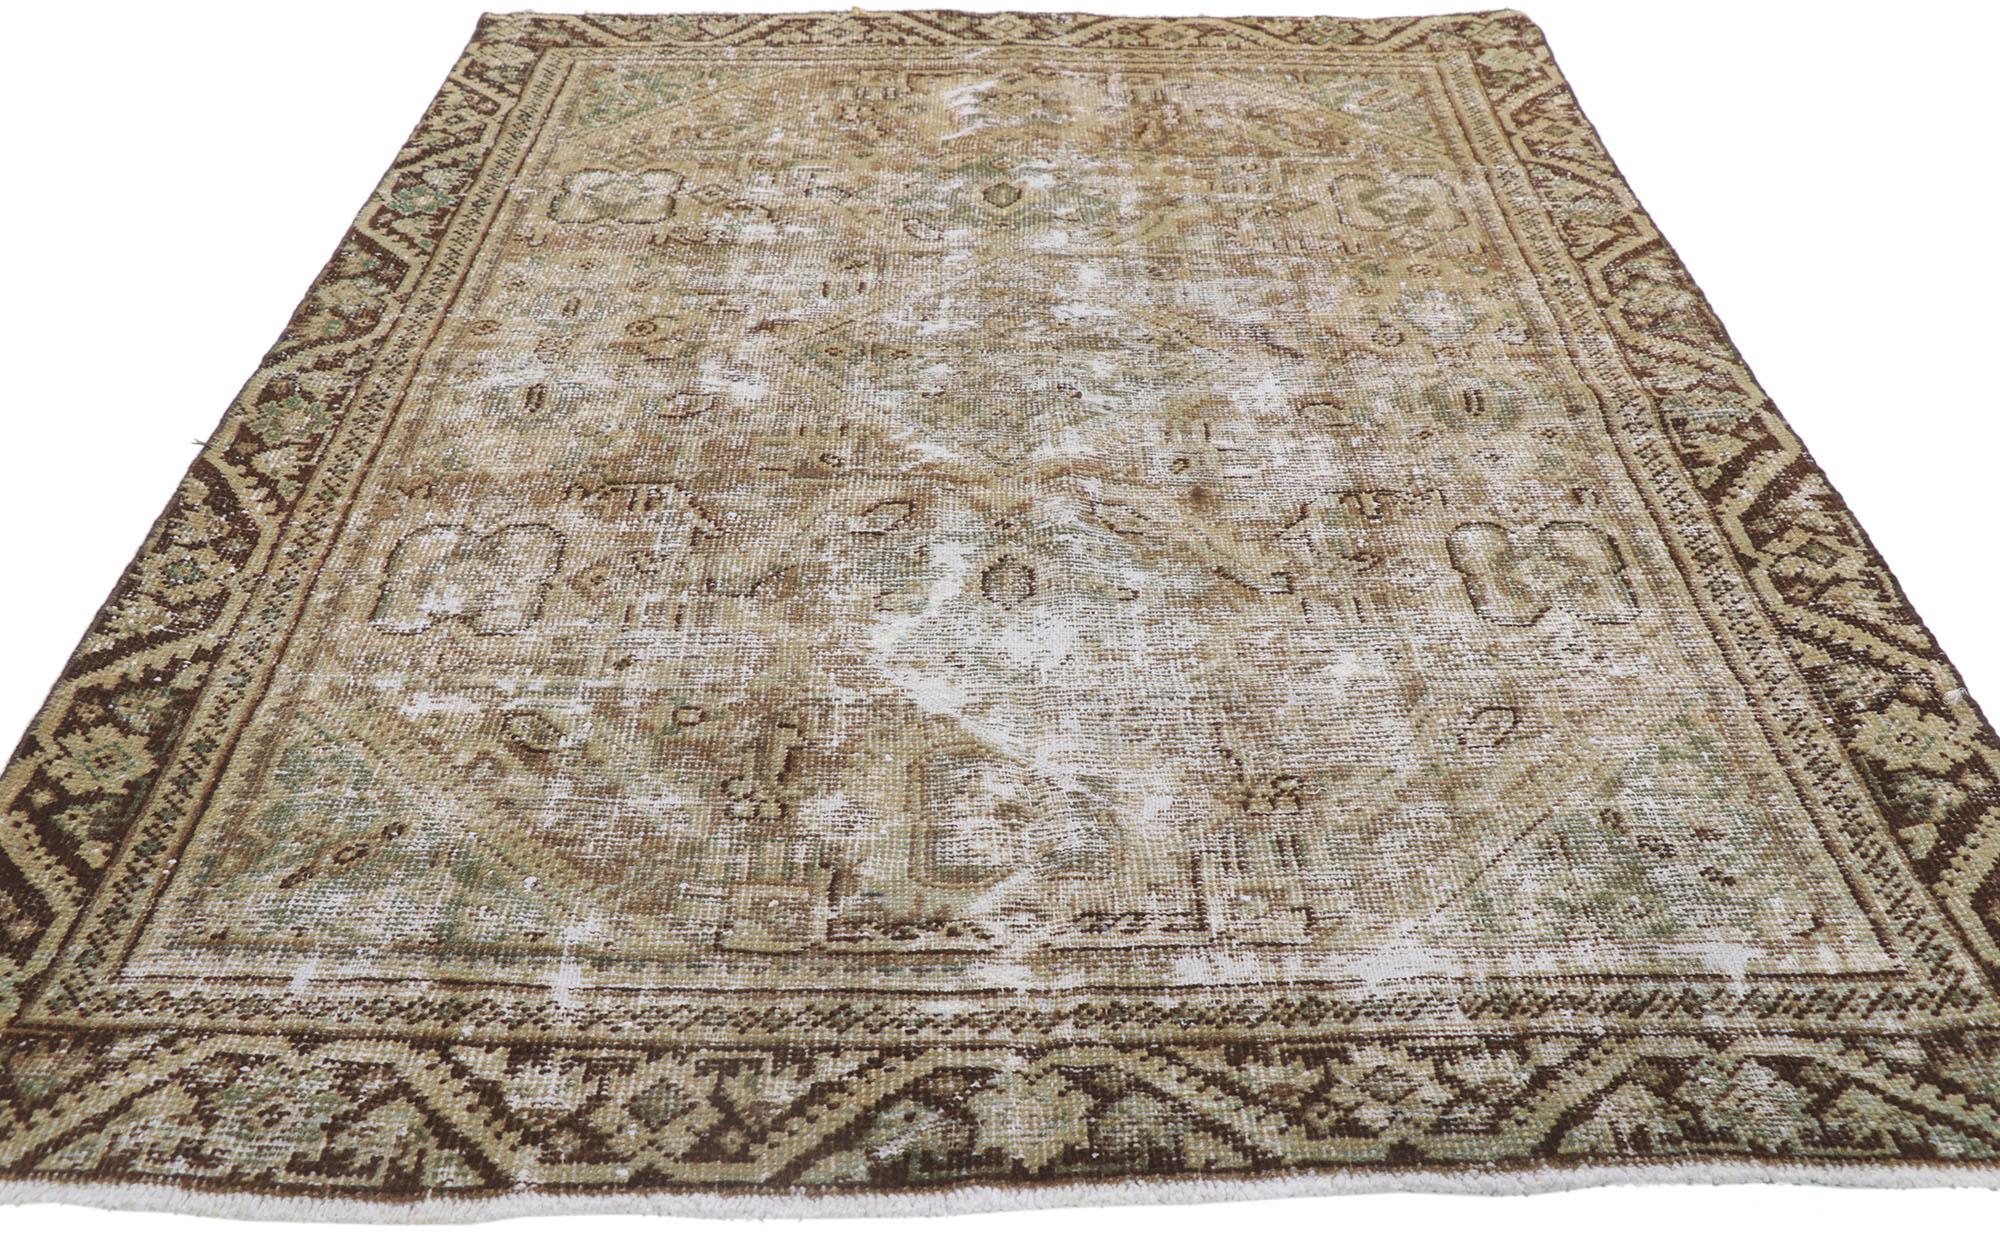 Rustic Weathered Distressed Antique Persian Mahal Rug